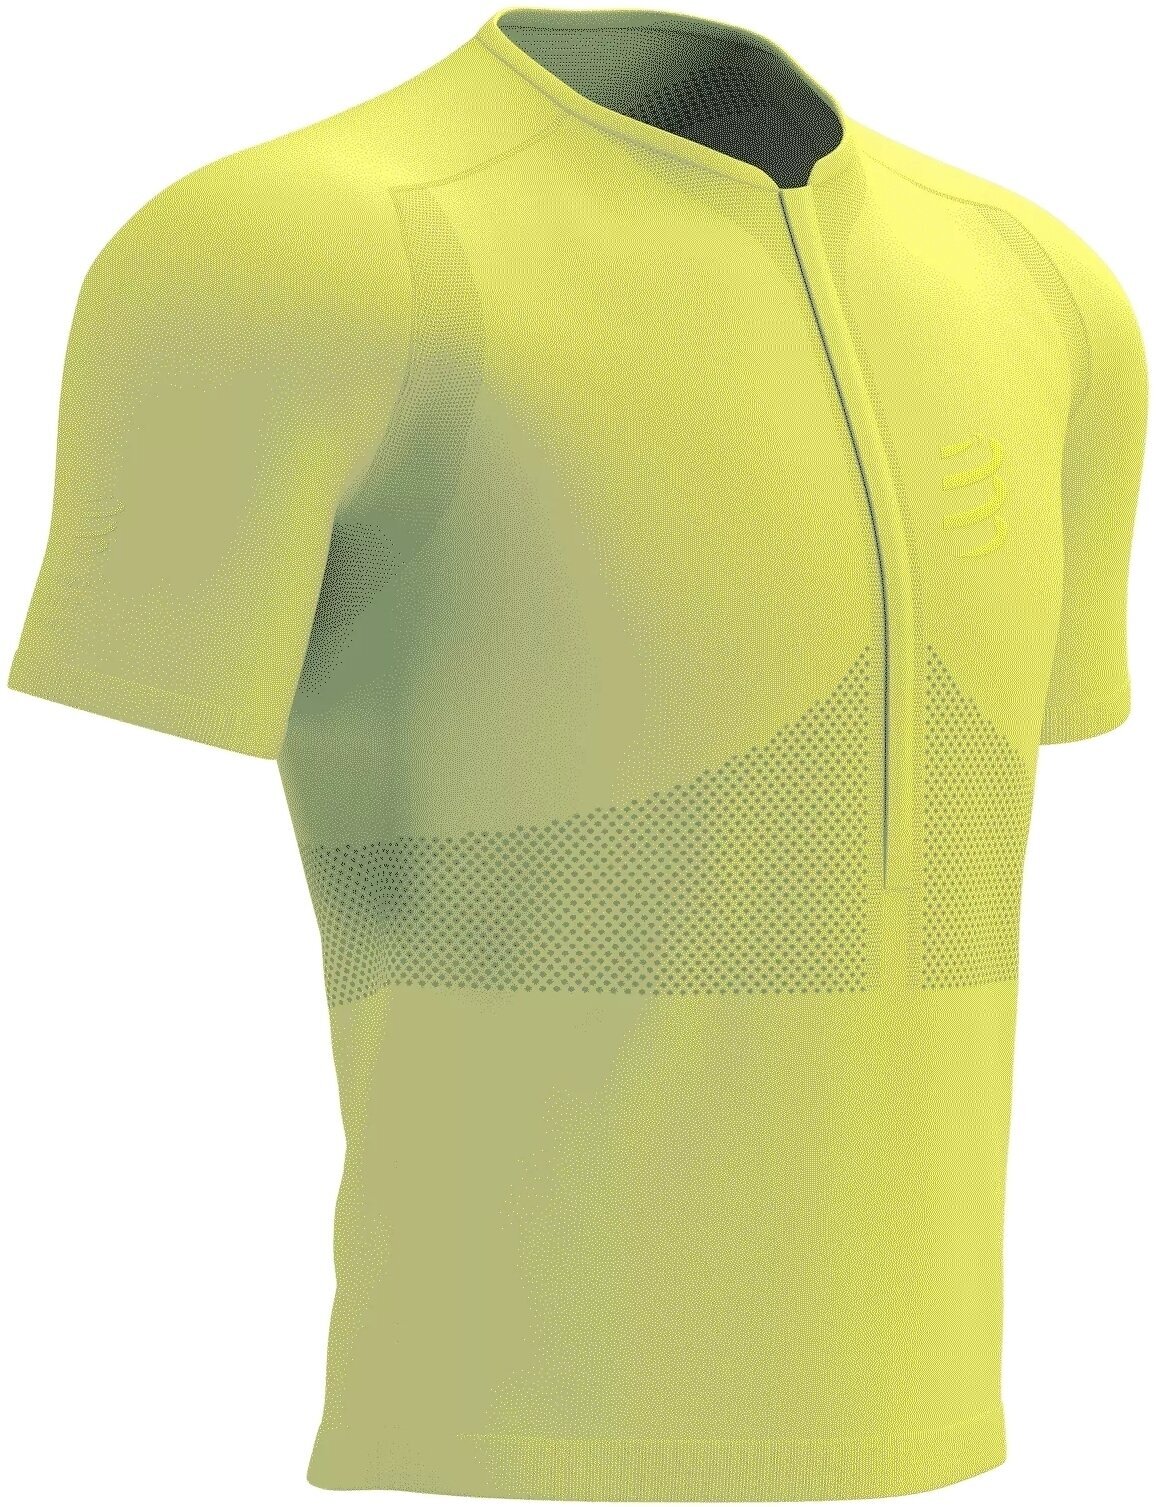 Running t-shirt with short sleeves
 Compressport Trail Half-Zip Fitted SS Top Green Sheen/Safety Yellow S Running t-shirt with short sleeves